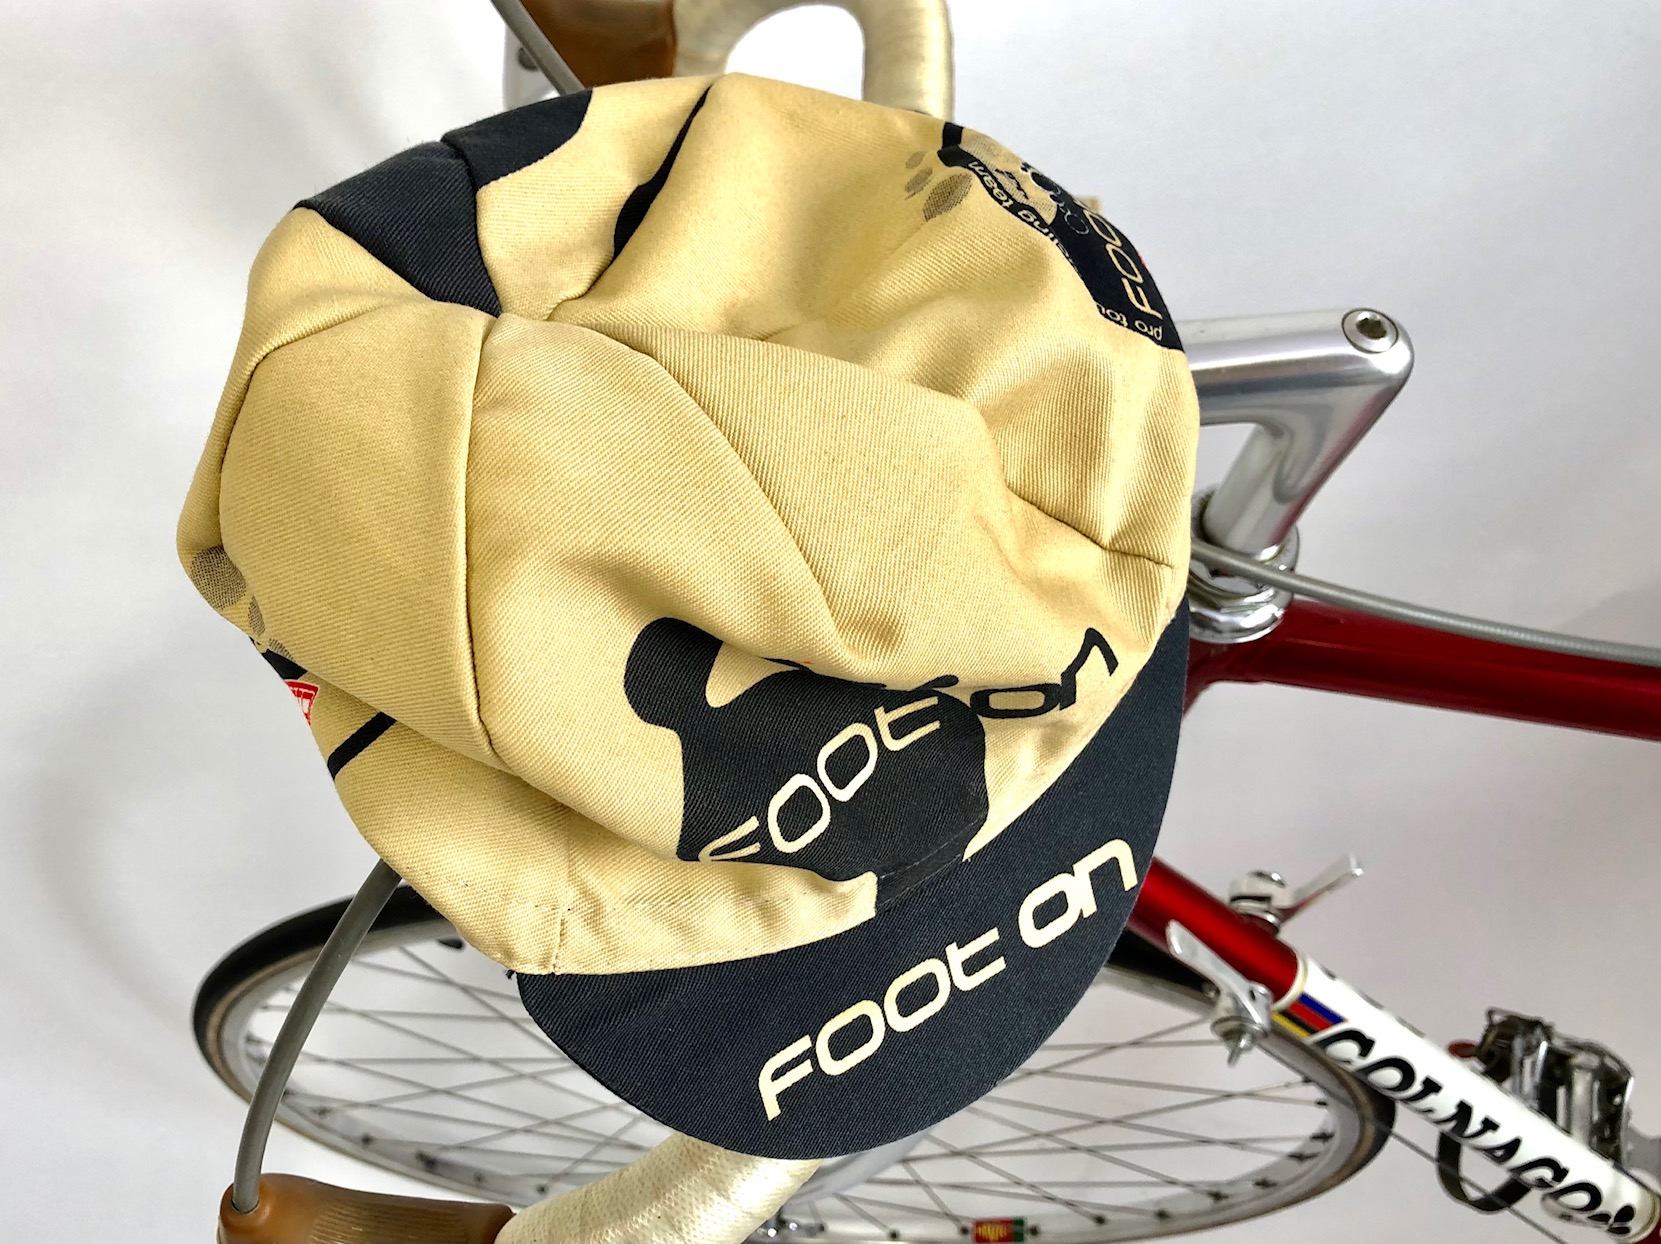 Cycling Cap Team Foot on